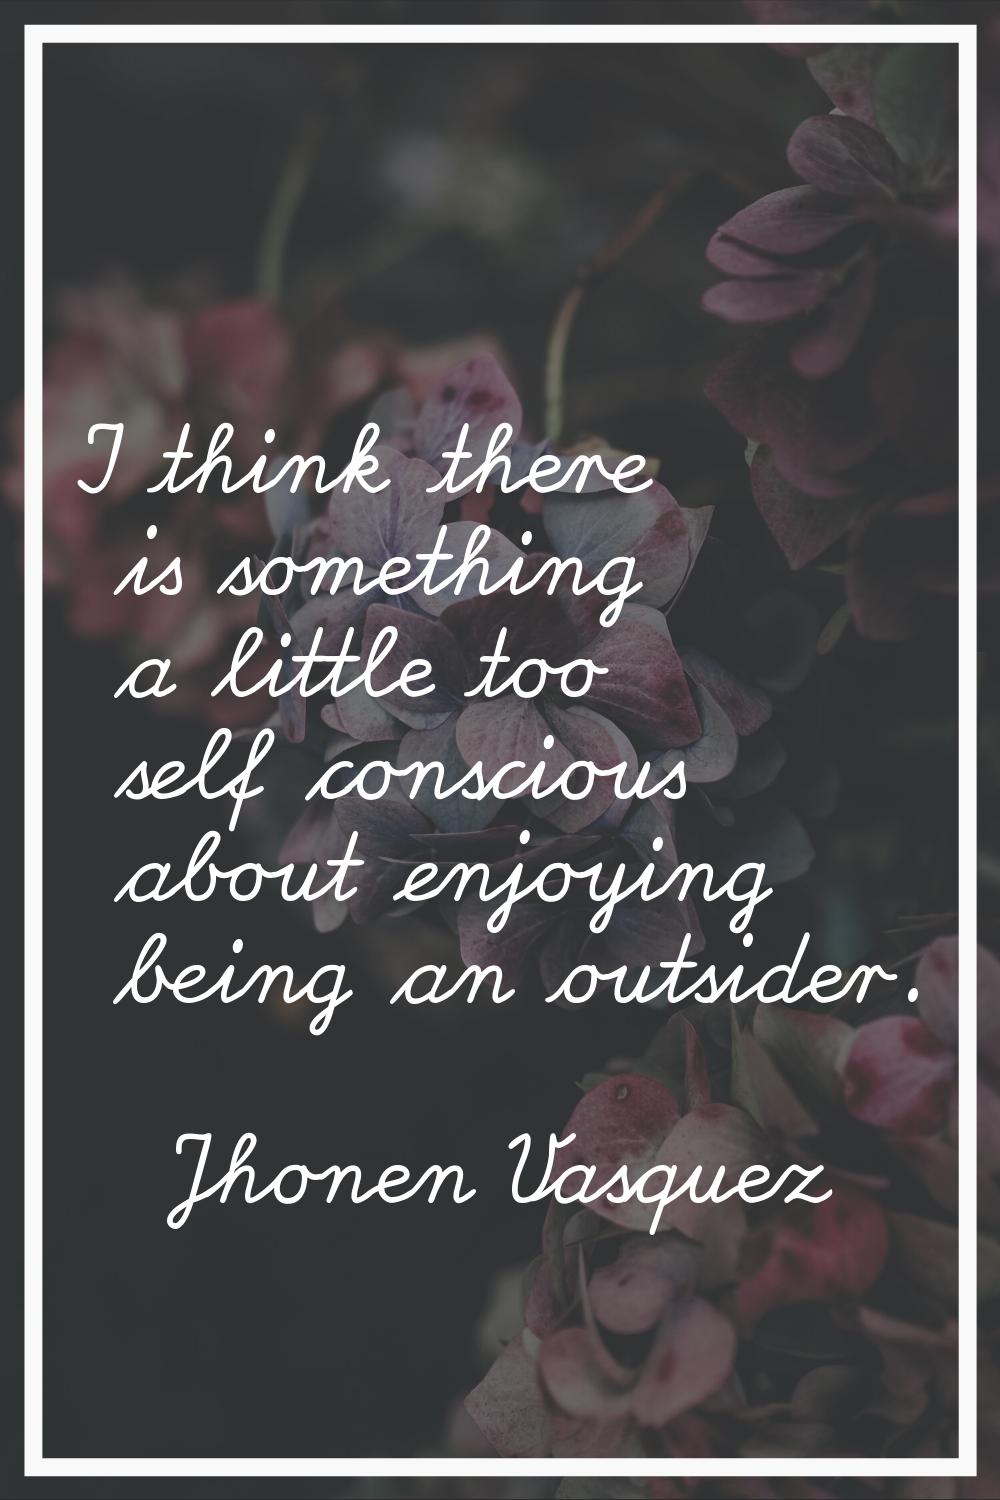 I think there is something a little too self conscious about enjoying being an outsider.